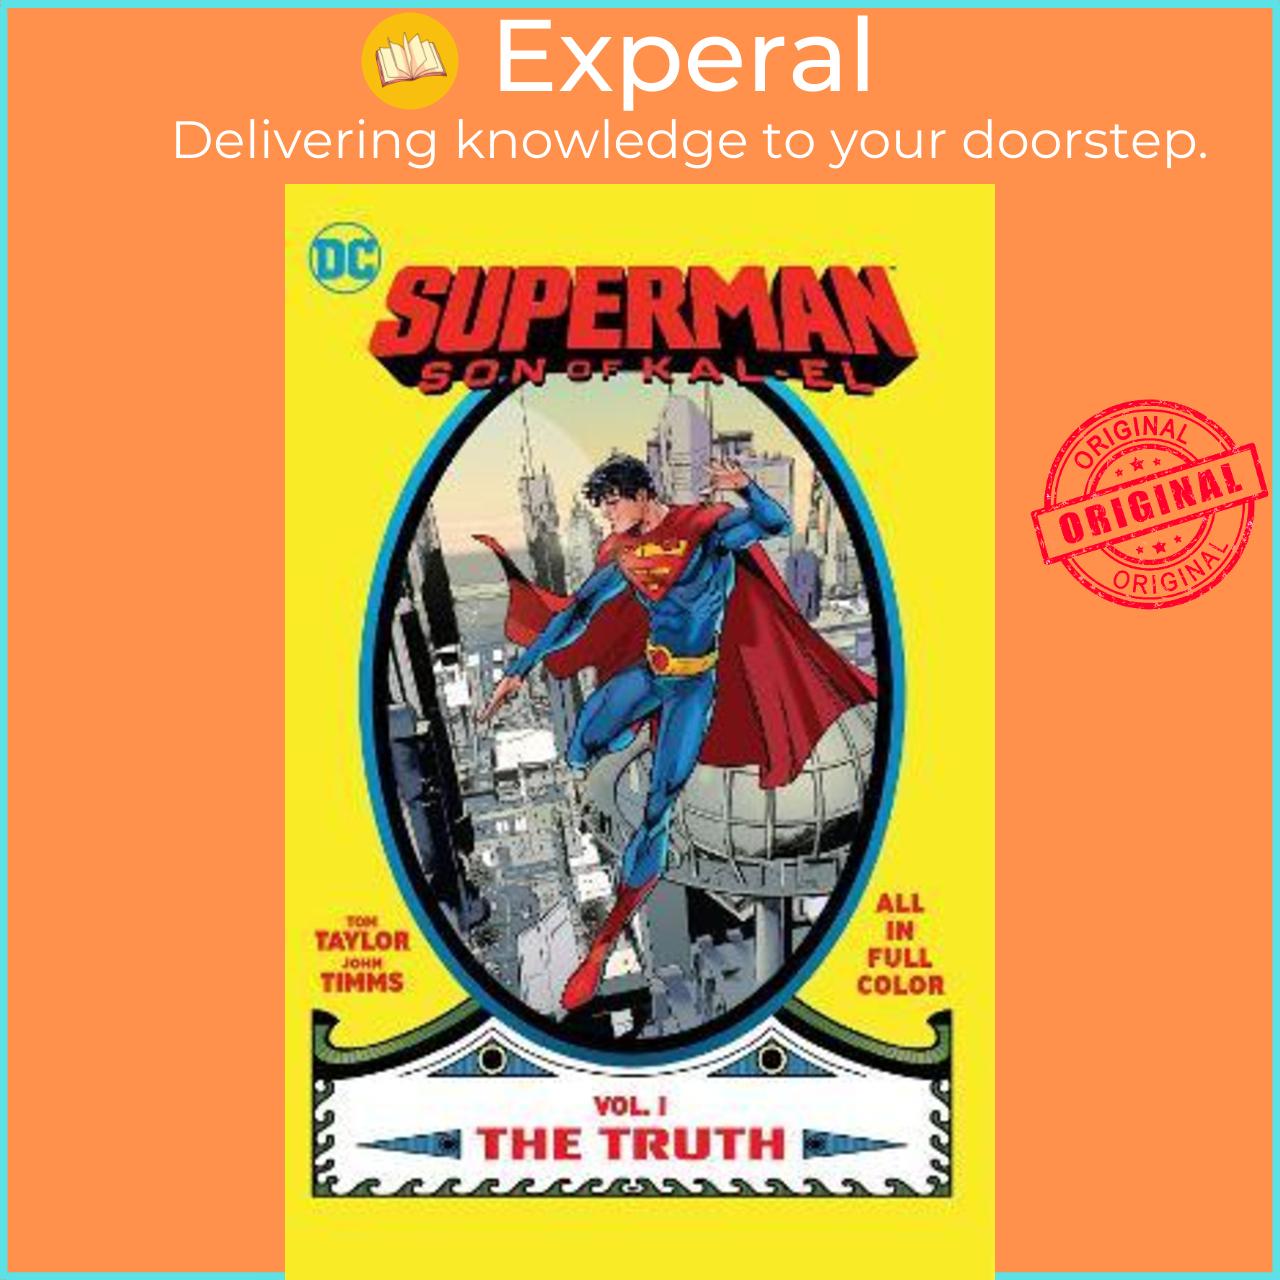 Sách - Superman: Son of Kal-El Vol. 1: The Truth by Tom Taylor (US edition, paperback)